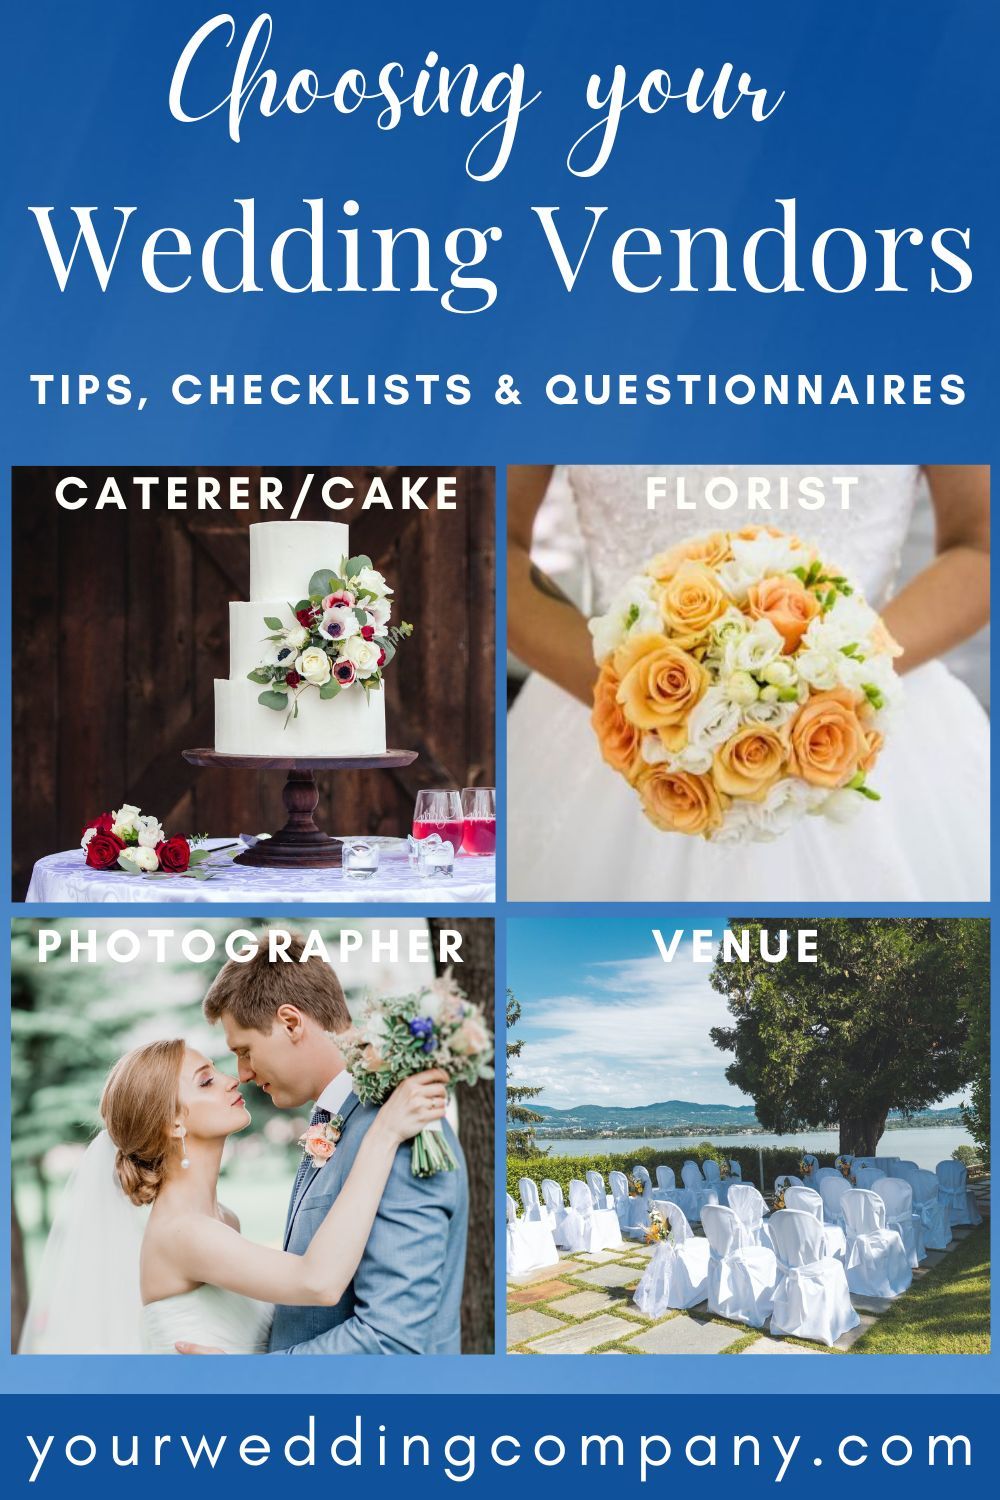 Choosing Your Wedding Vendors - Tips, Checklists & Questionnaires